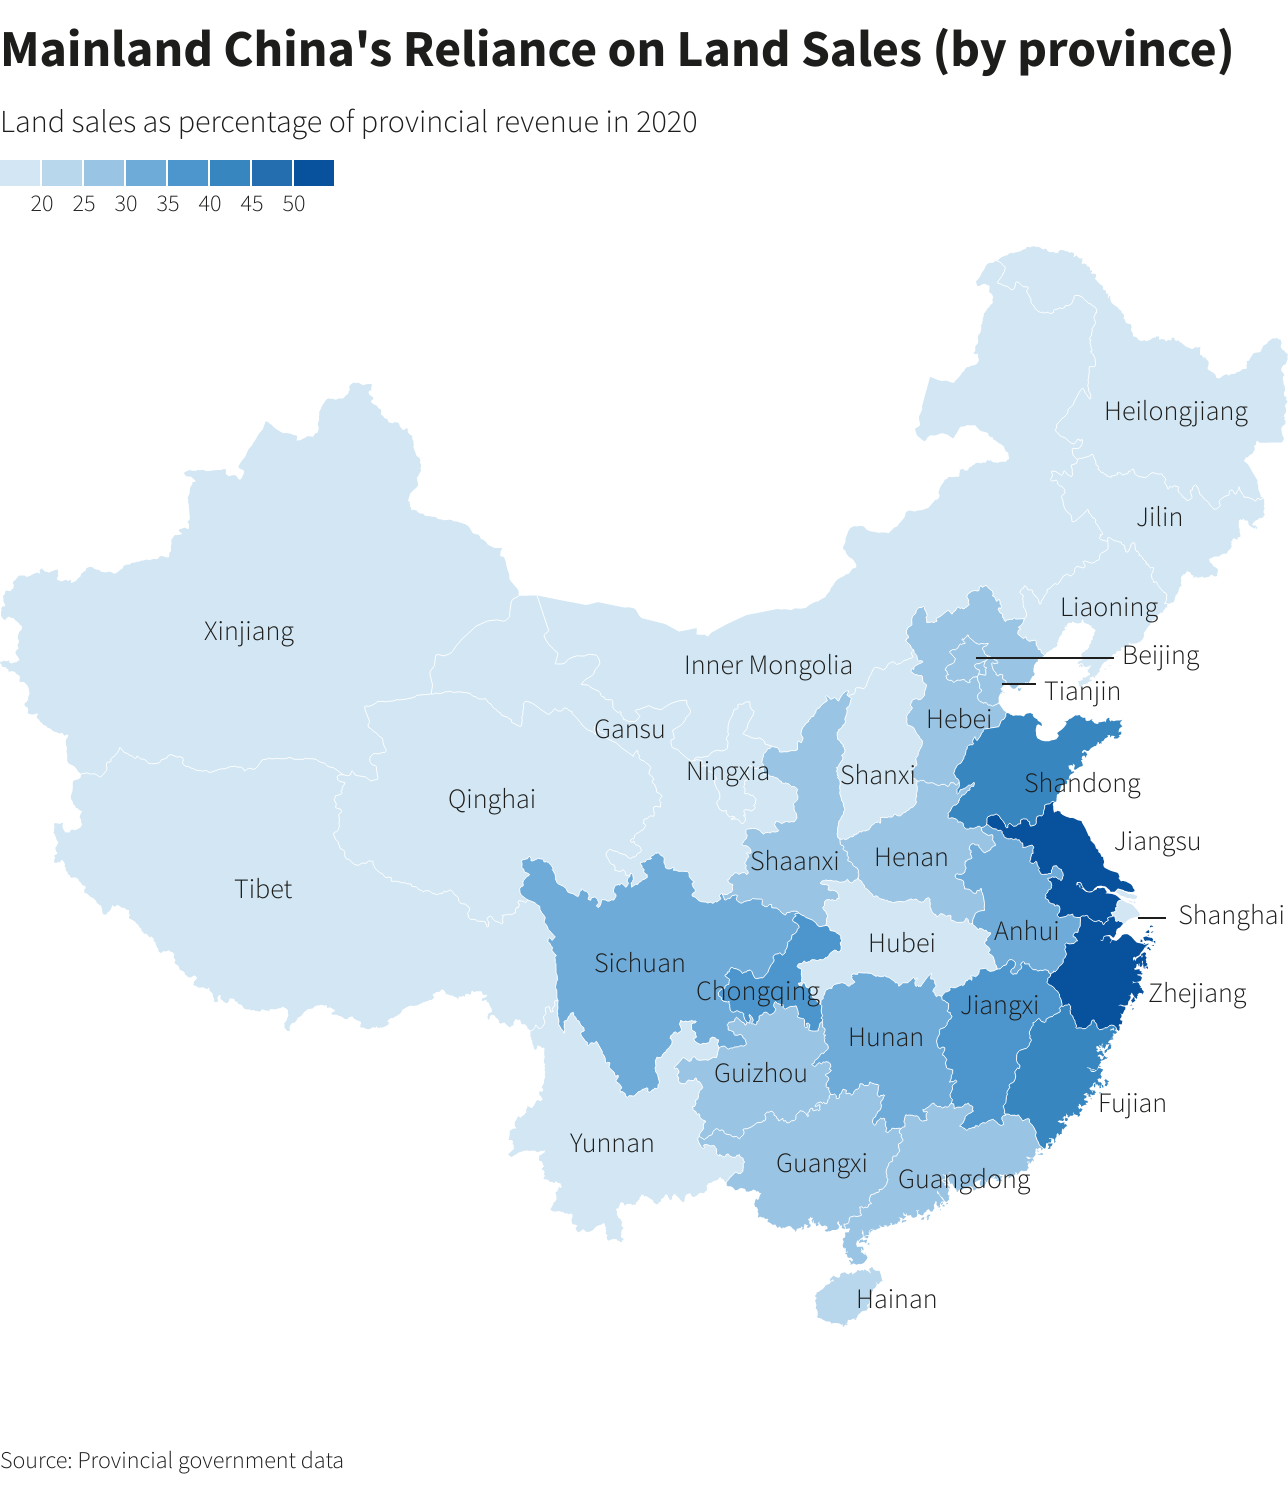 Mainland China's Reliance on Land Sales (by province) Mainland China's Reliance on Land Sales (by province)